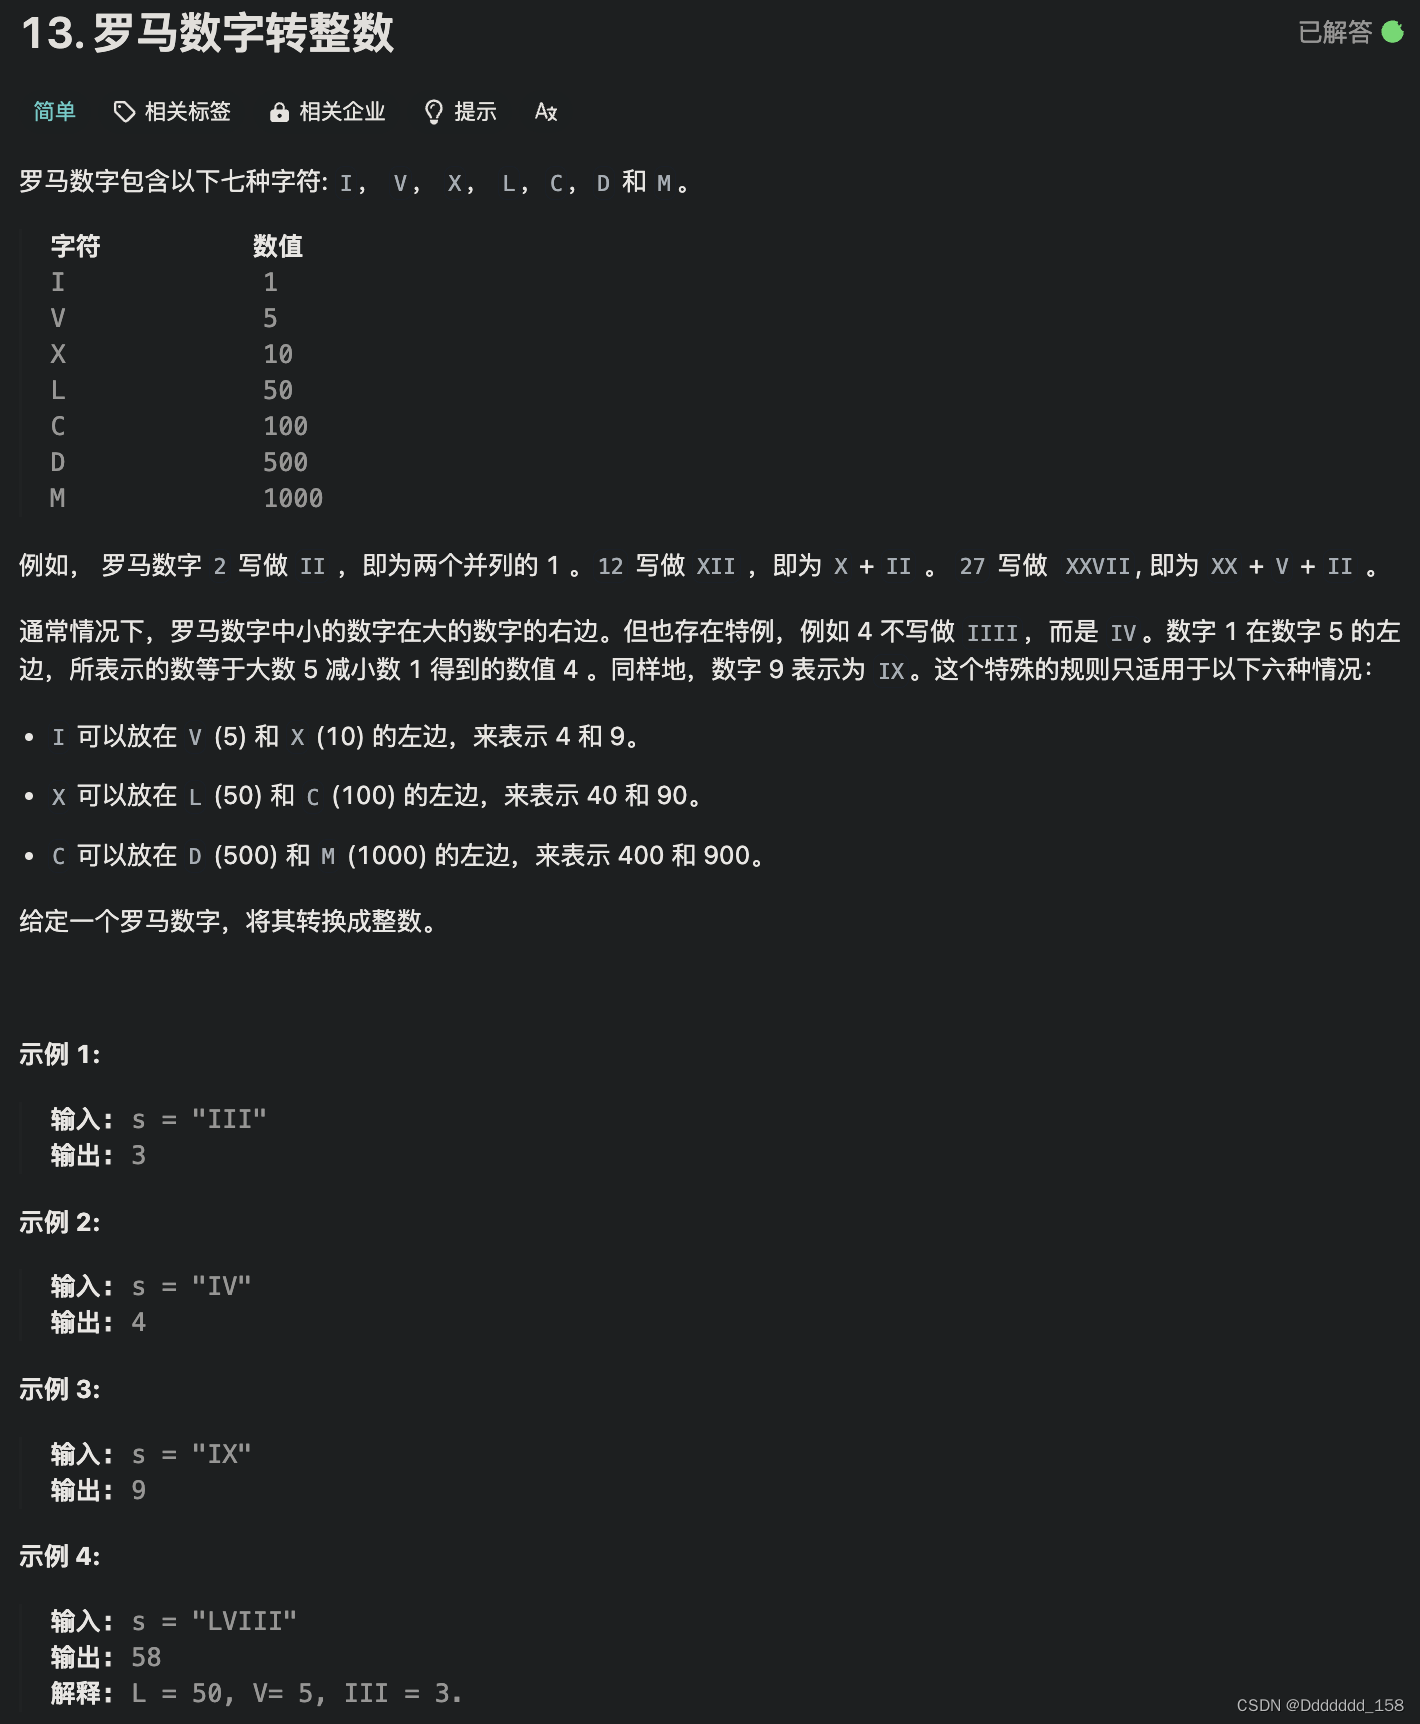 C++ | Leetcode C++题解<span style='color:red;'>之</span><span style='color:red;'>第</span><span style='color:red;'>13</span><span style='color:red;'>题</span><span style='color:red;'>罗马数字</span><span style='color:red;'>转</span><span style='color:red;'>整数</span>